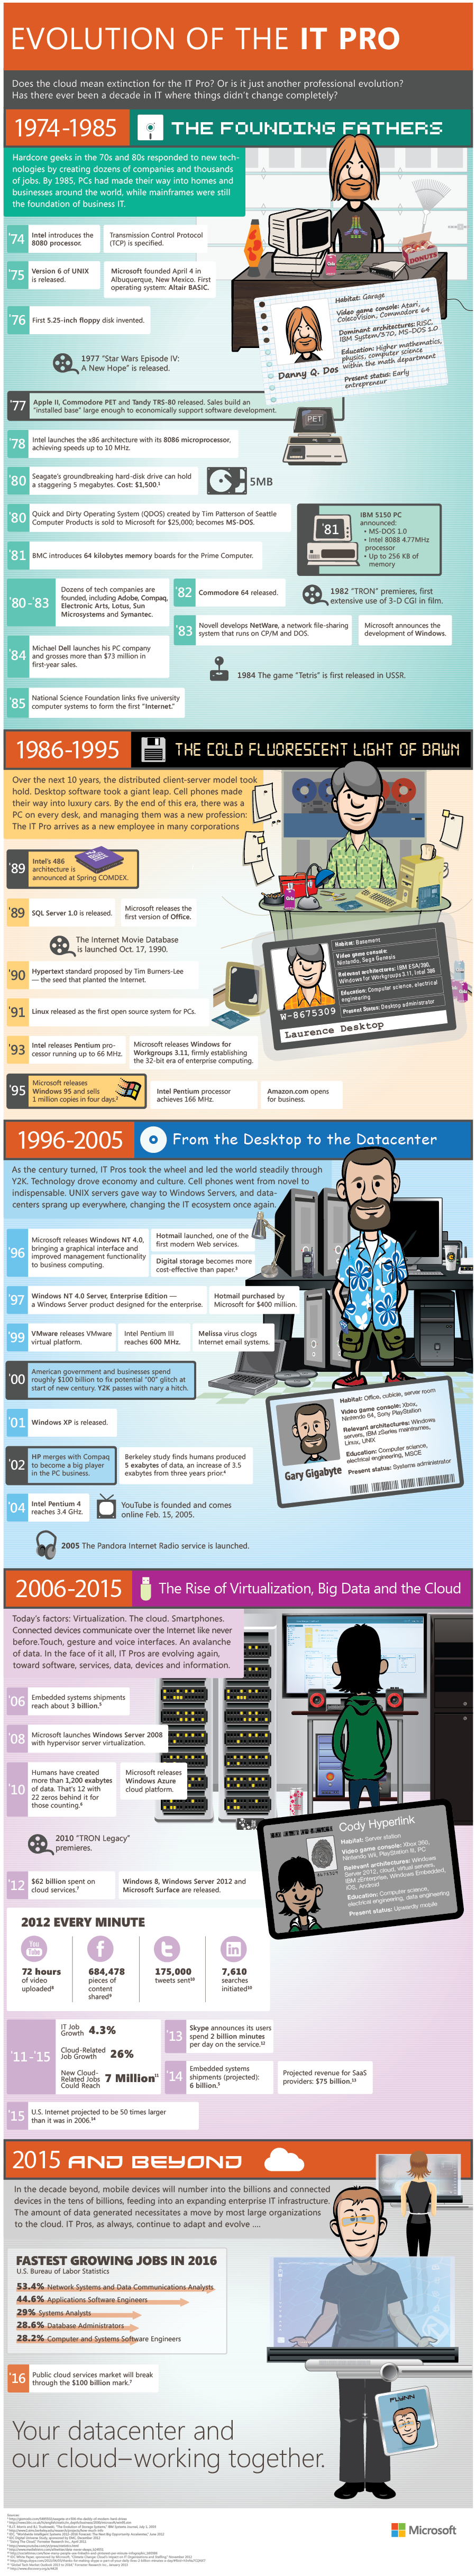 Evolution of the IT Pro